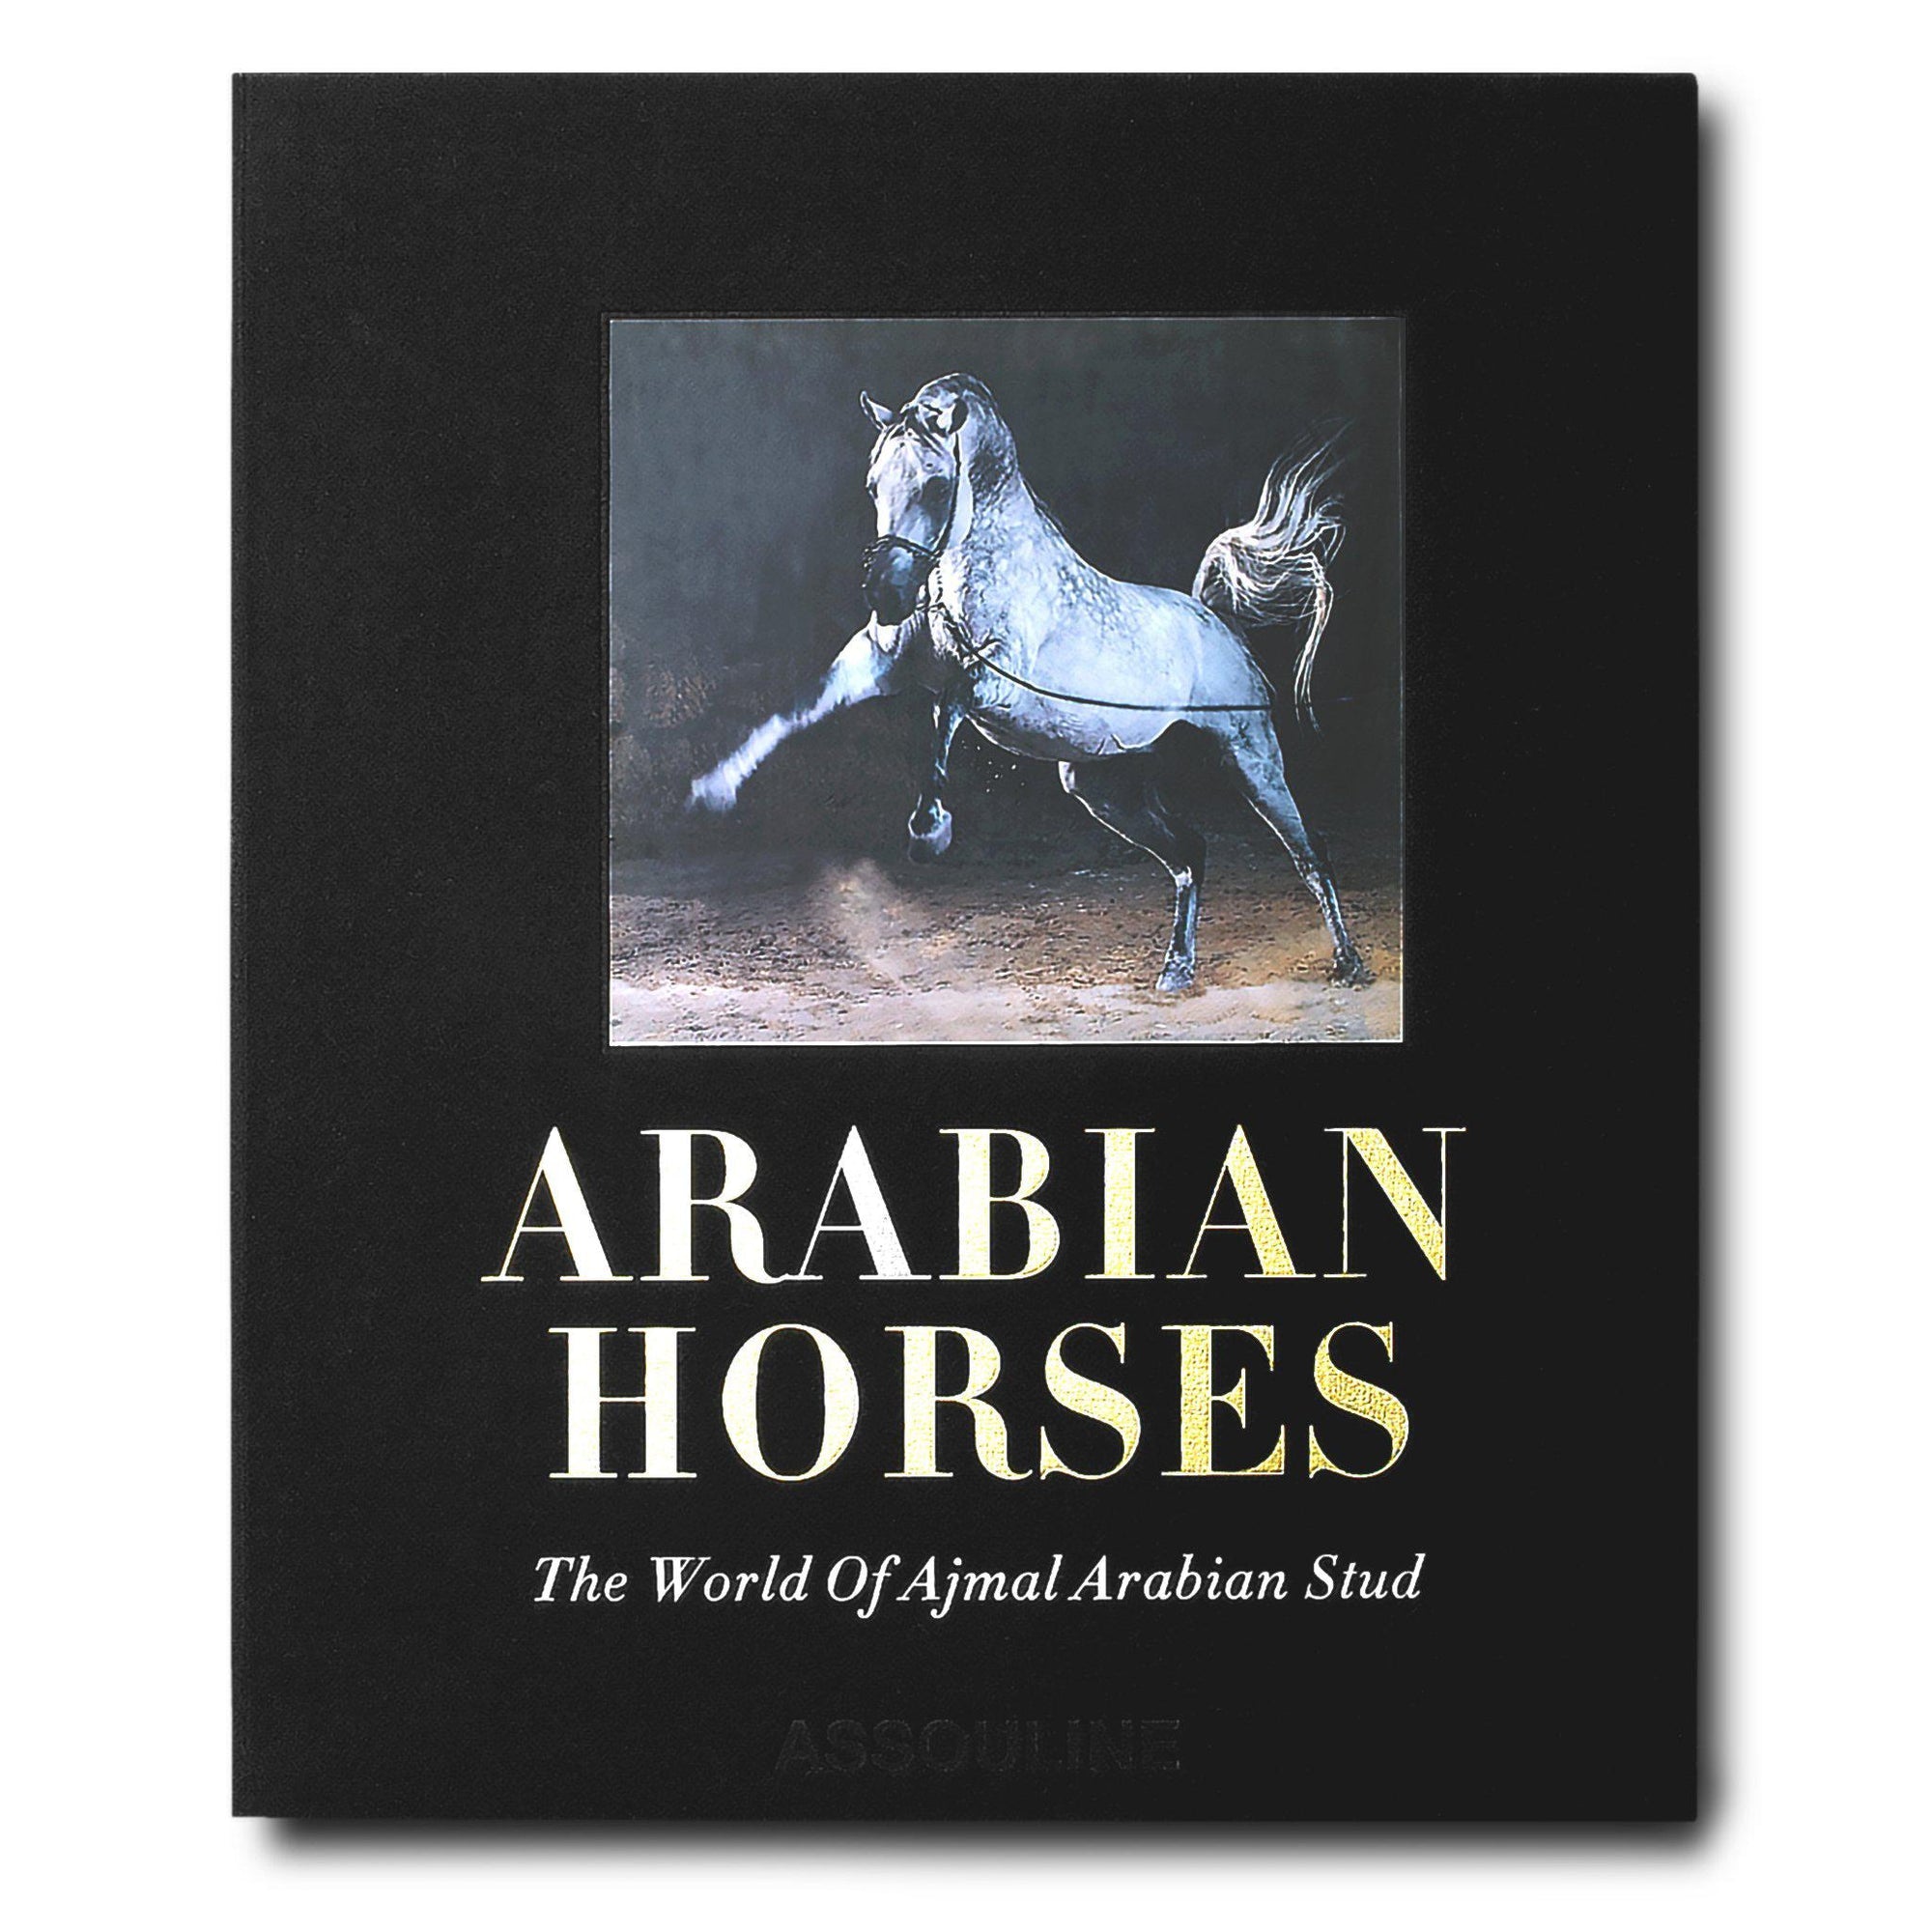 Impossible Collection of Arabian Horses